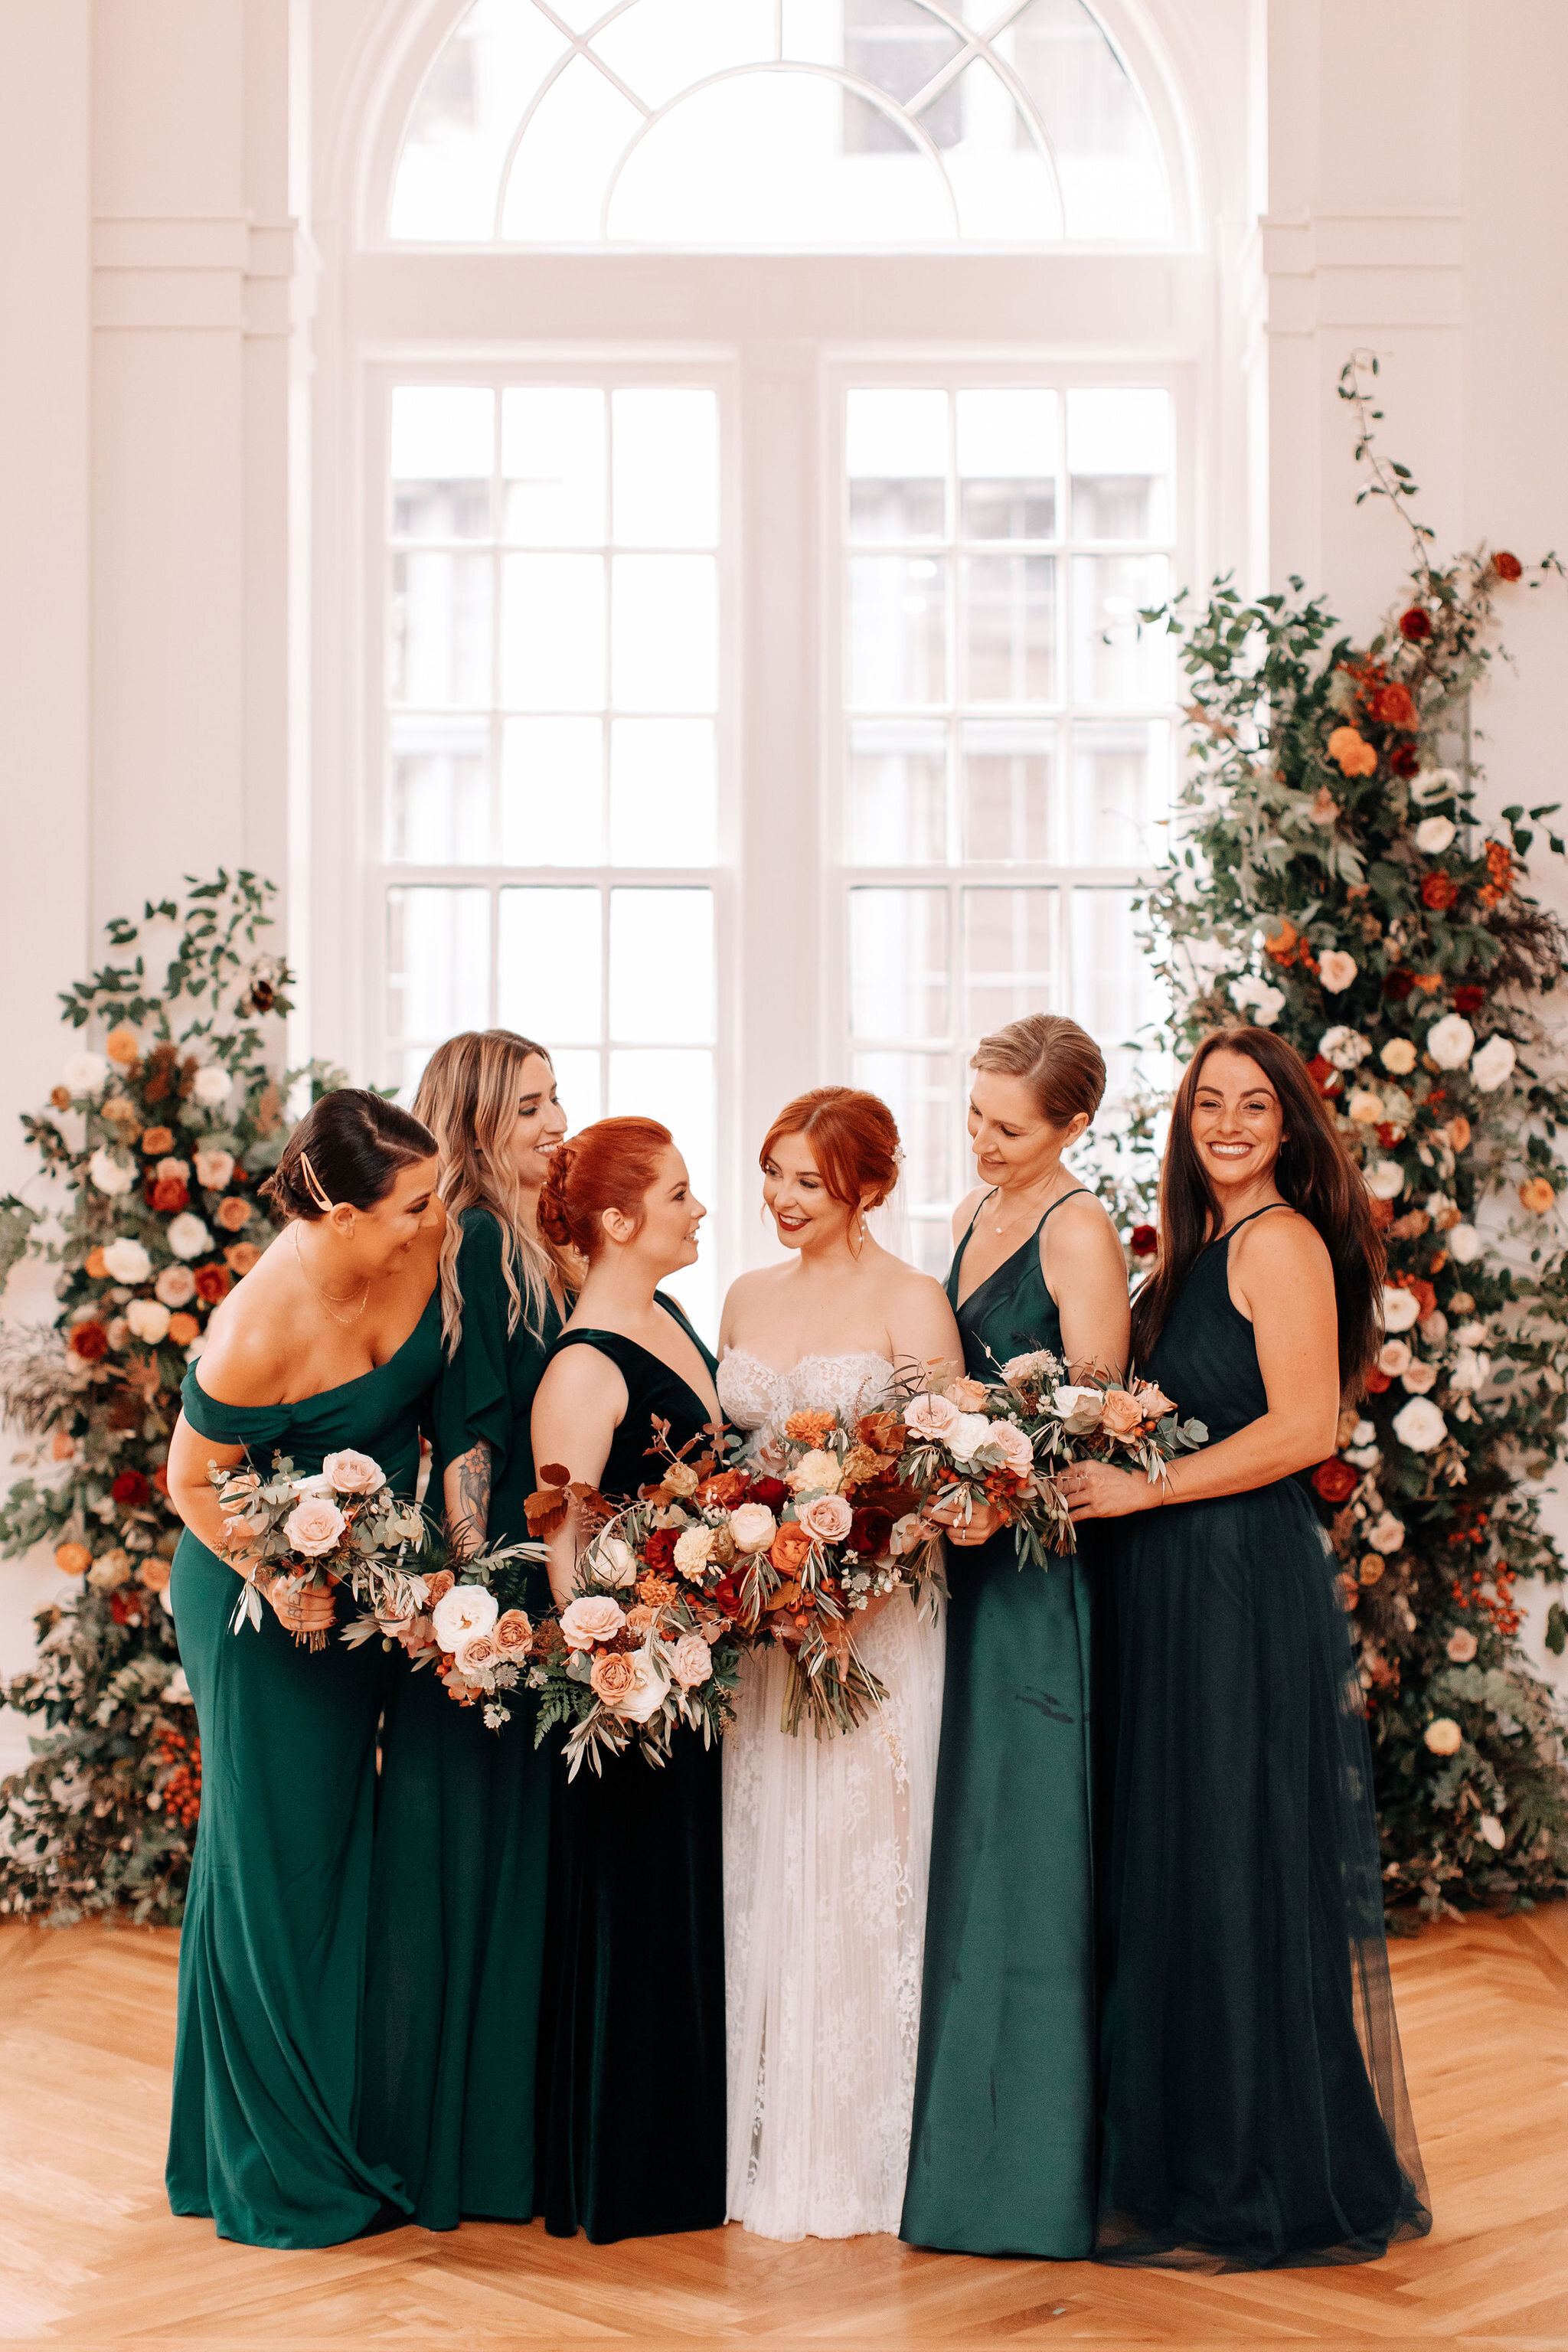 Emerald green bridesmaid dresses, black tuxes, redhead bride, and rusty red and burnt orange florals with natural greenery. Nashville wedding florist at the Noelle.